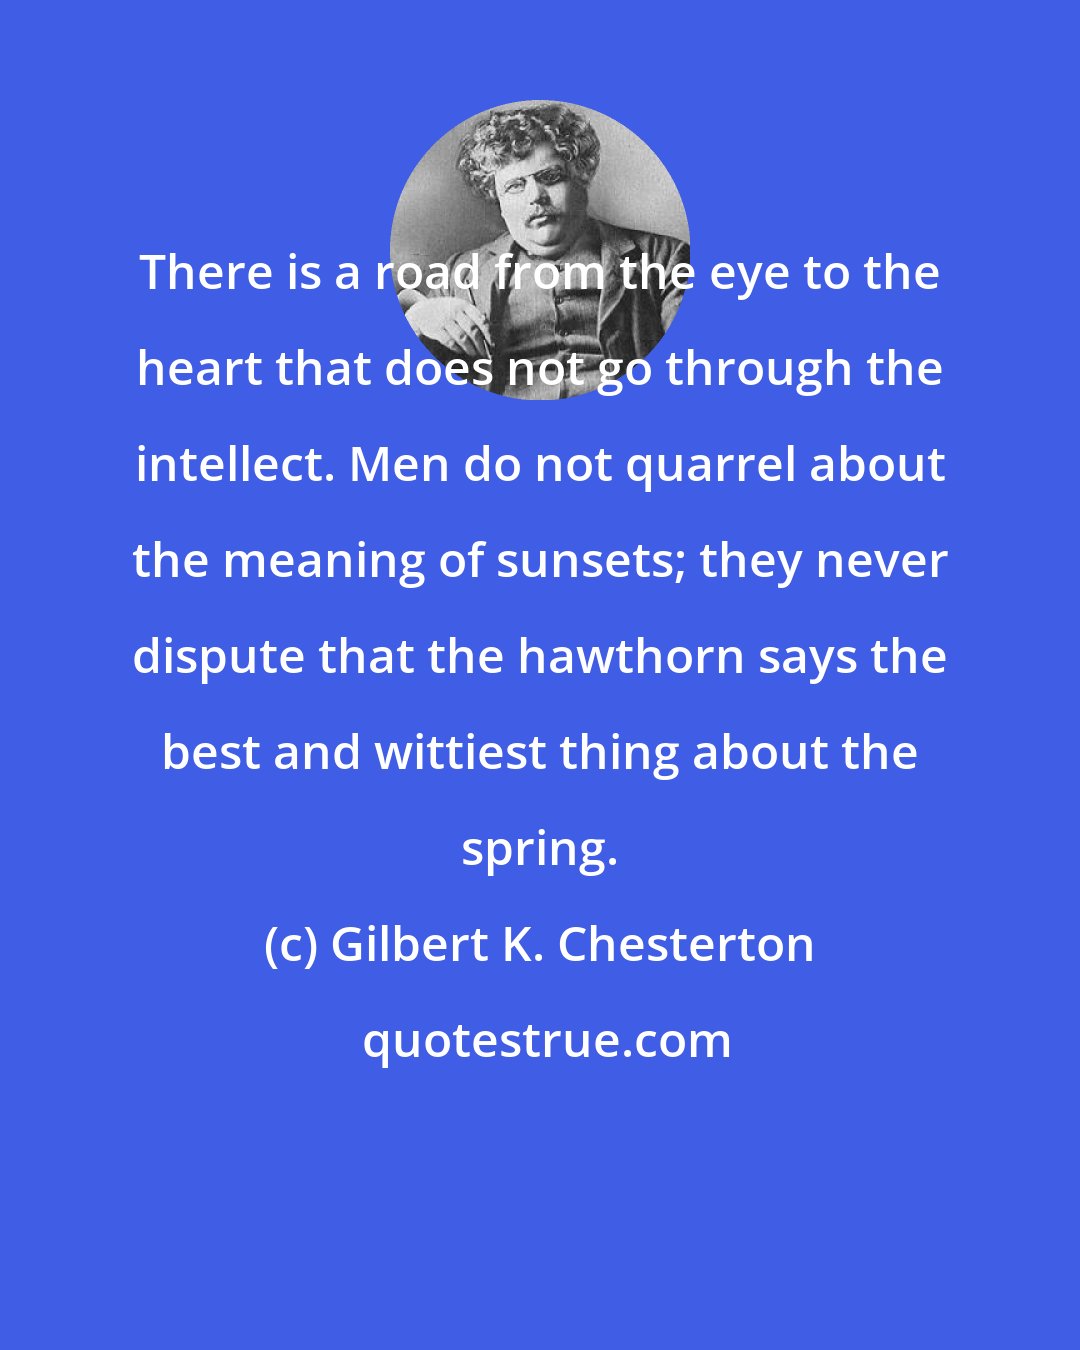 Gilbert K. Chesterton: There is a road from the eye to the heart that does not go through the intellect. Men do not quarrel about the meaning of sunsets; they never dispute that the hawthorn says the best and wittiest thing about the spring.